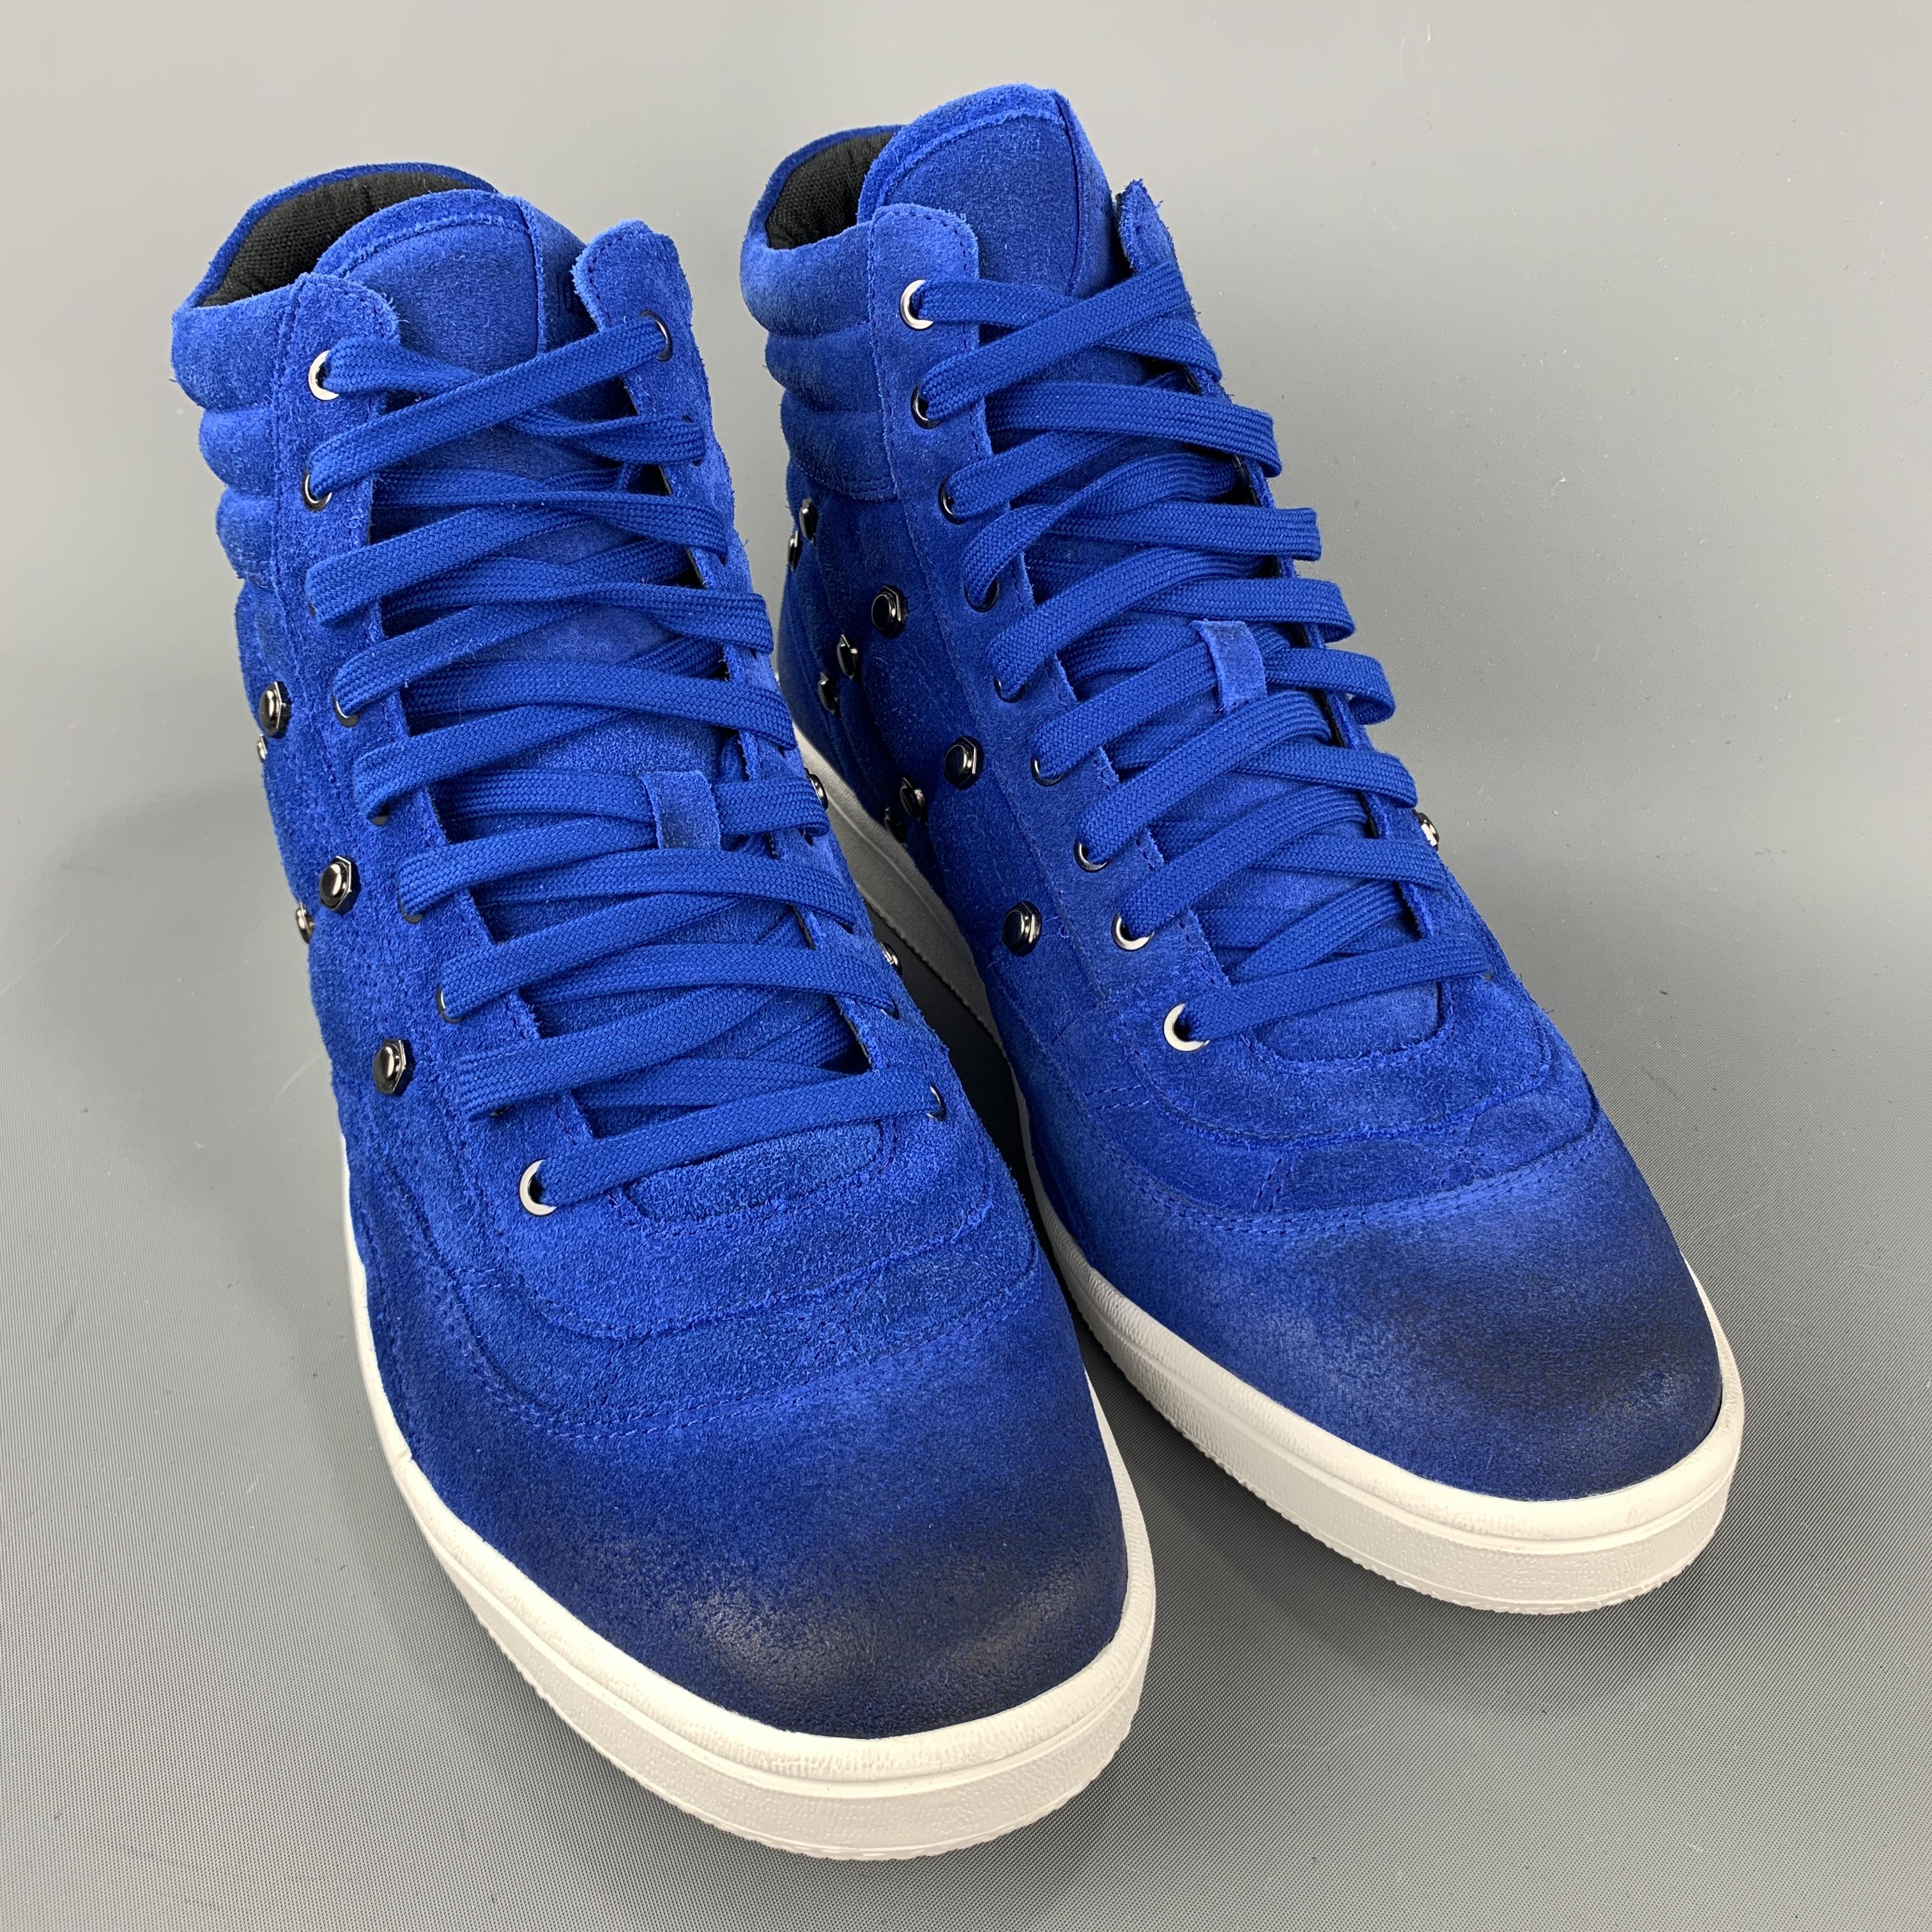 JUST CAVALLI sneakers comes in a royal blue suede featuring a high top style, quilted, studded details, and a rubber sole.

New With Box
Marked: 10.5

Outsole:  4 in. x 12.5 in.